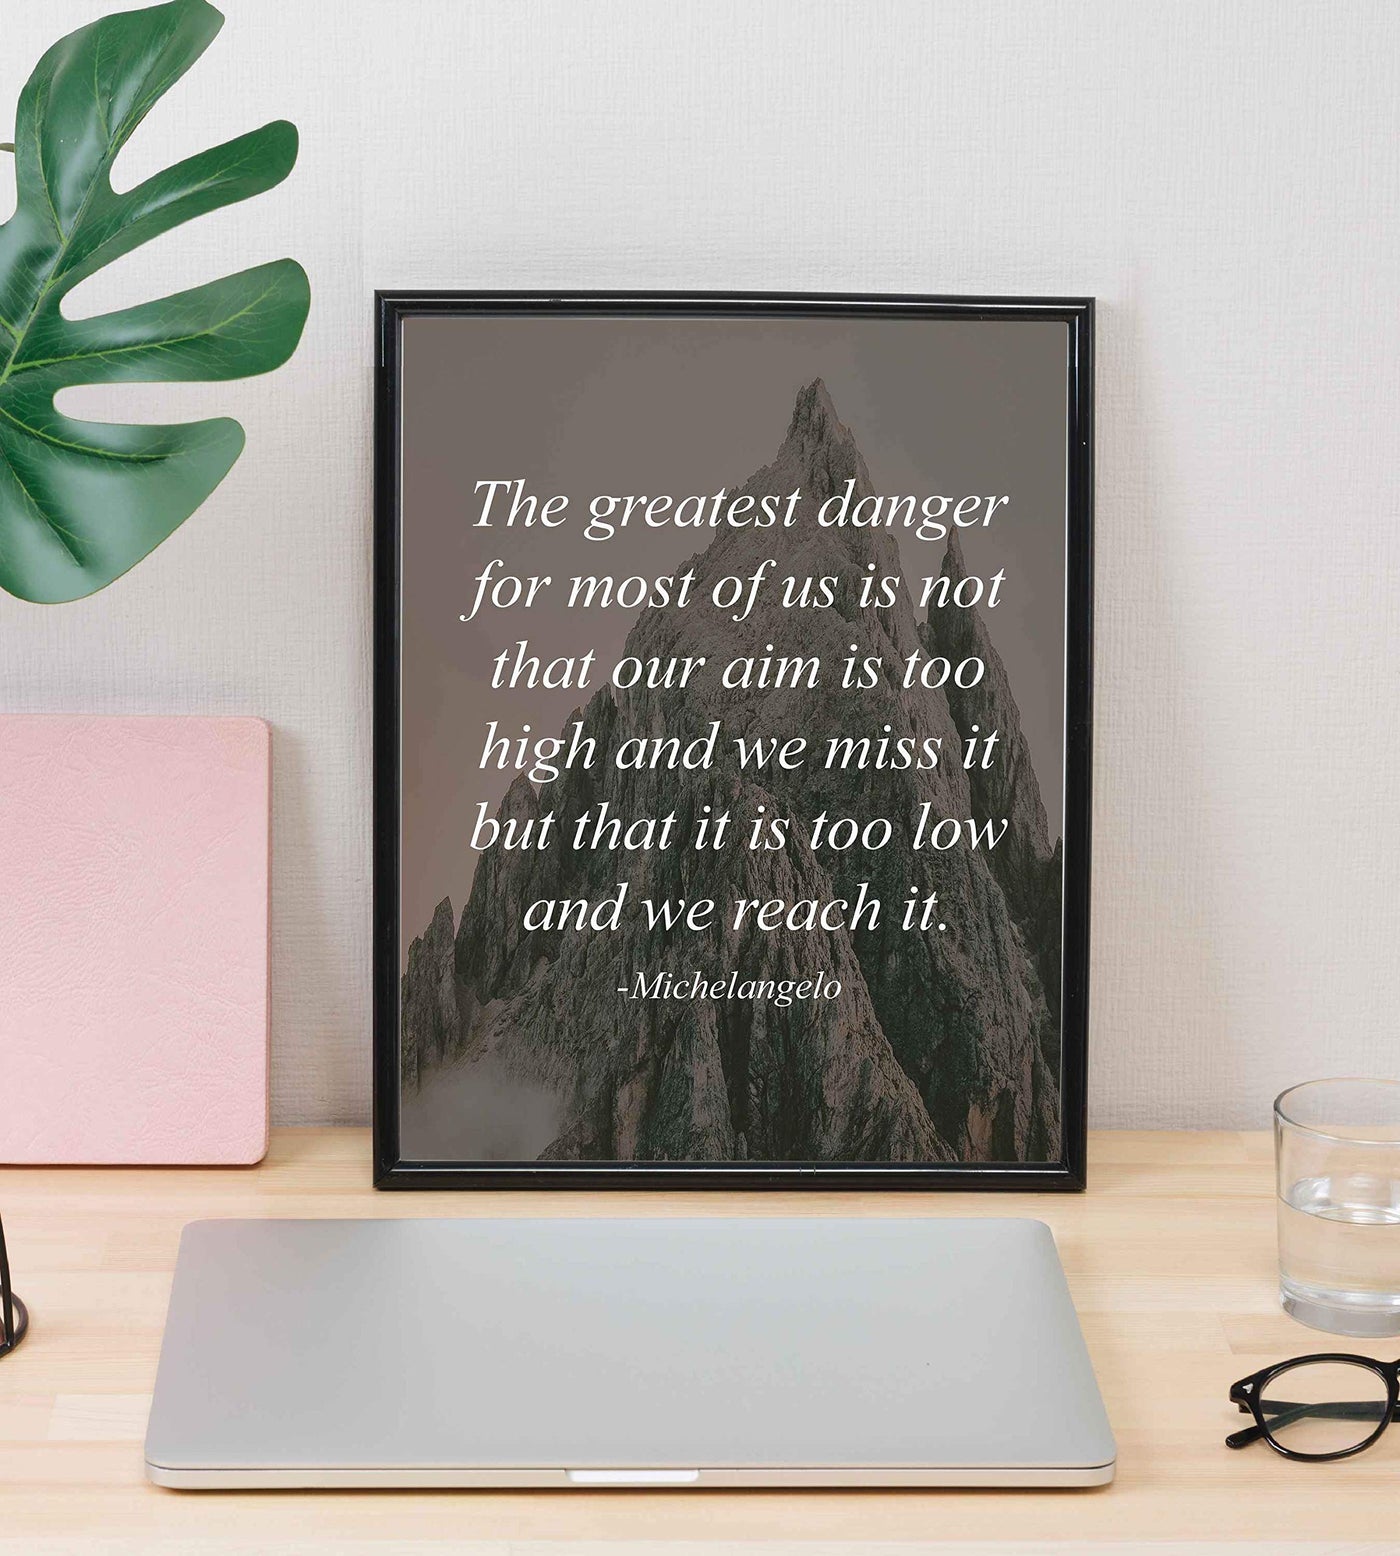 Michelangelo Quotes Wall Art- ?The Greatest Danger for Most of Us? -8 x 10" Motivational Poster Print- Ready to Frame. Home-Office-School-Library Decor. Perfect Gift for Motivation & Inspiration!